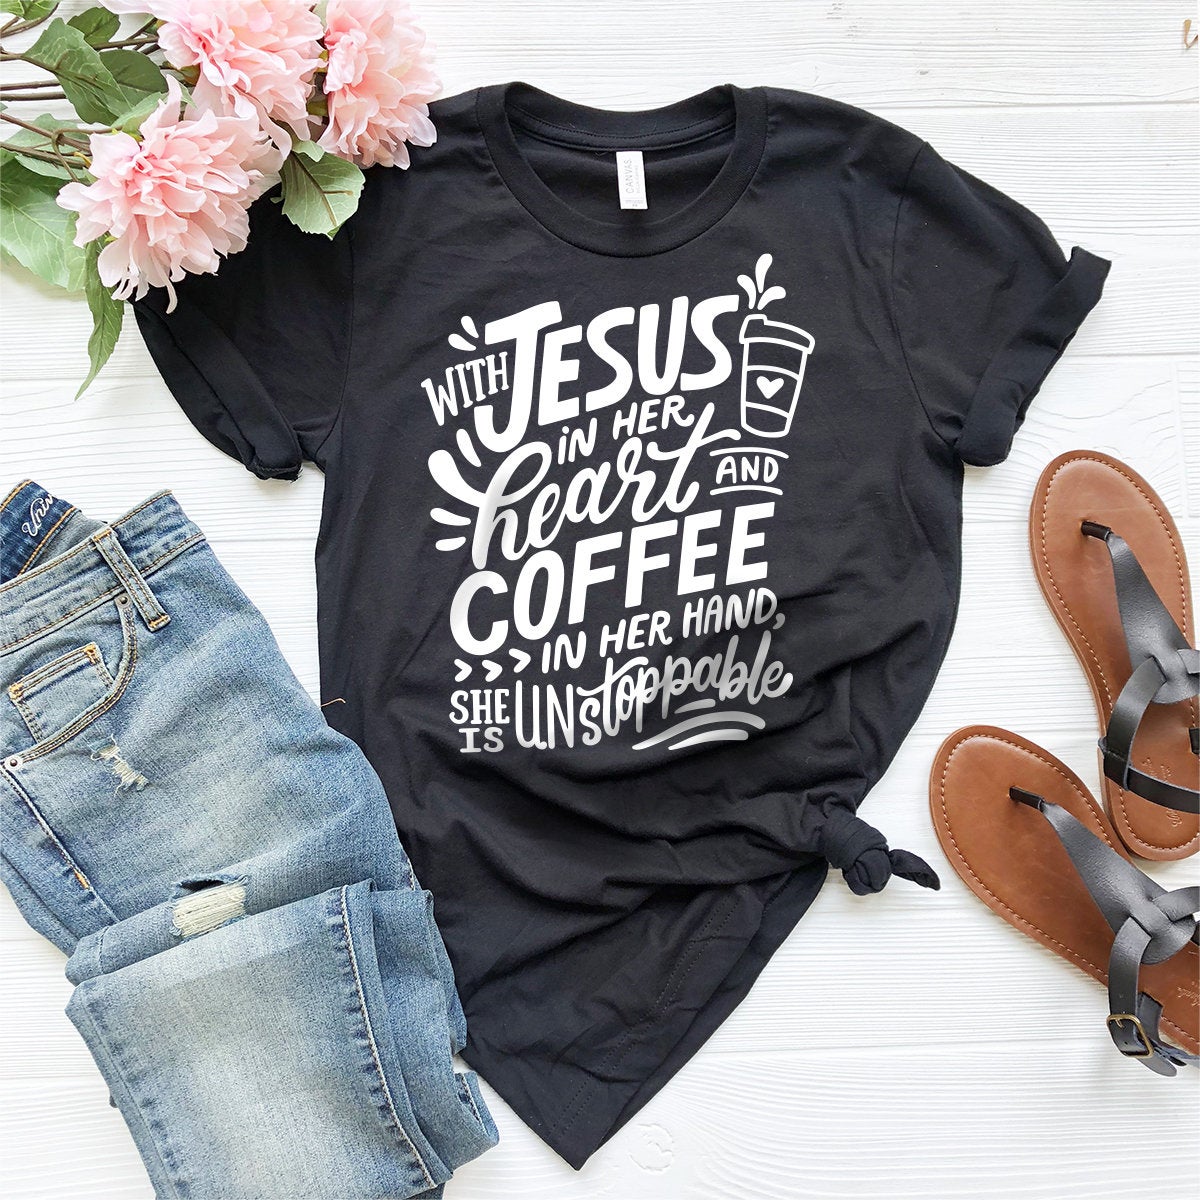 Jesus And Cofee Shirt, Coffee Shirt, Jesus Shirt, Jesus Lover T-Shirt, Coffee Lover Shirt, With Jesus In Her Heart And Coffee In Her Hand - Fastdeliverytees.com